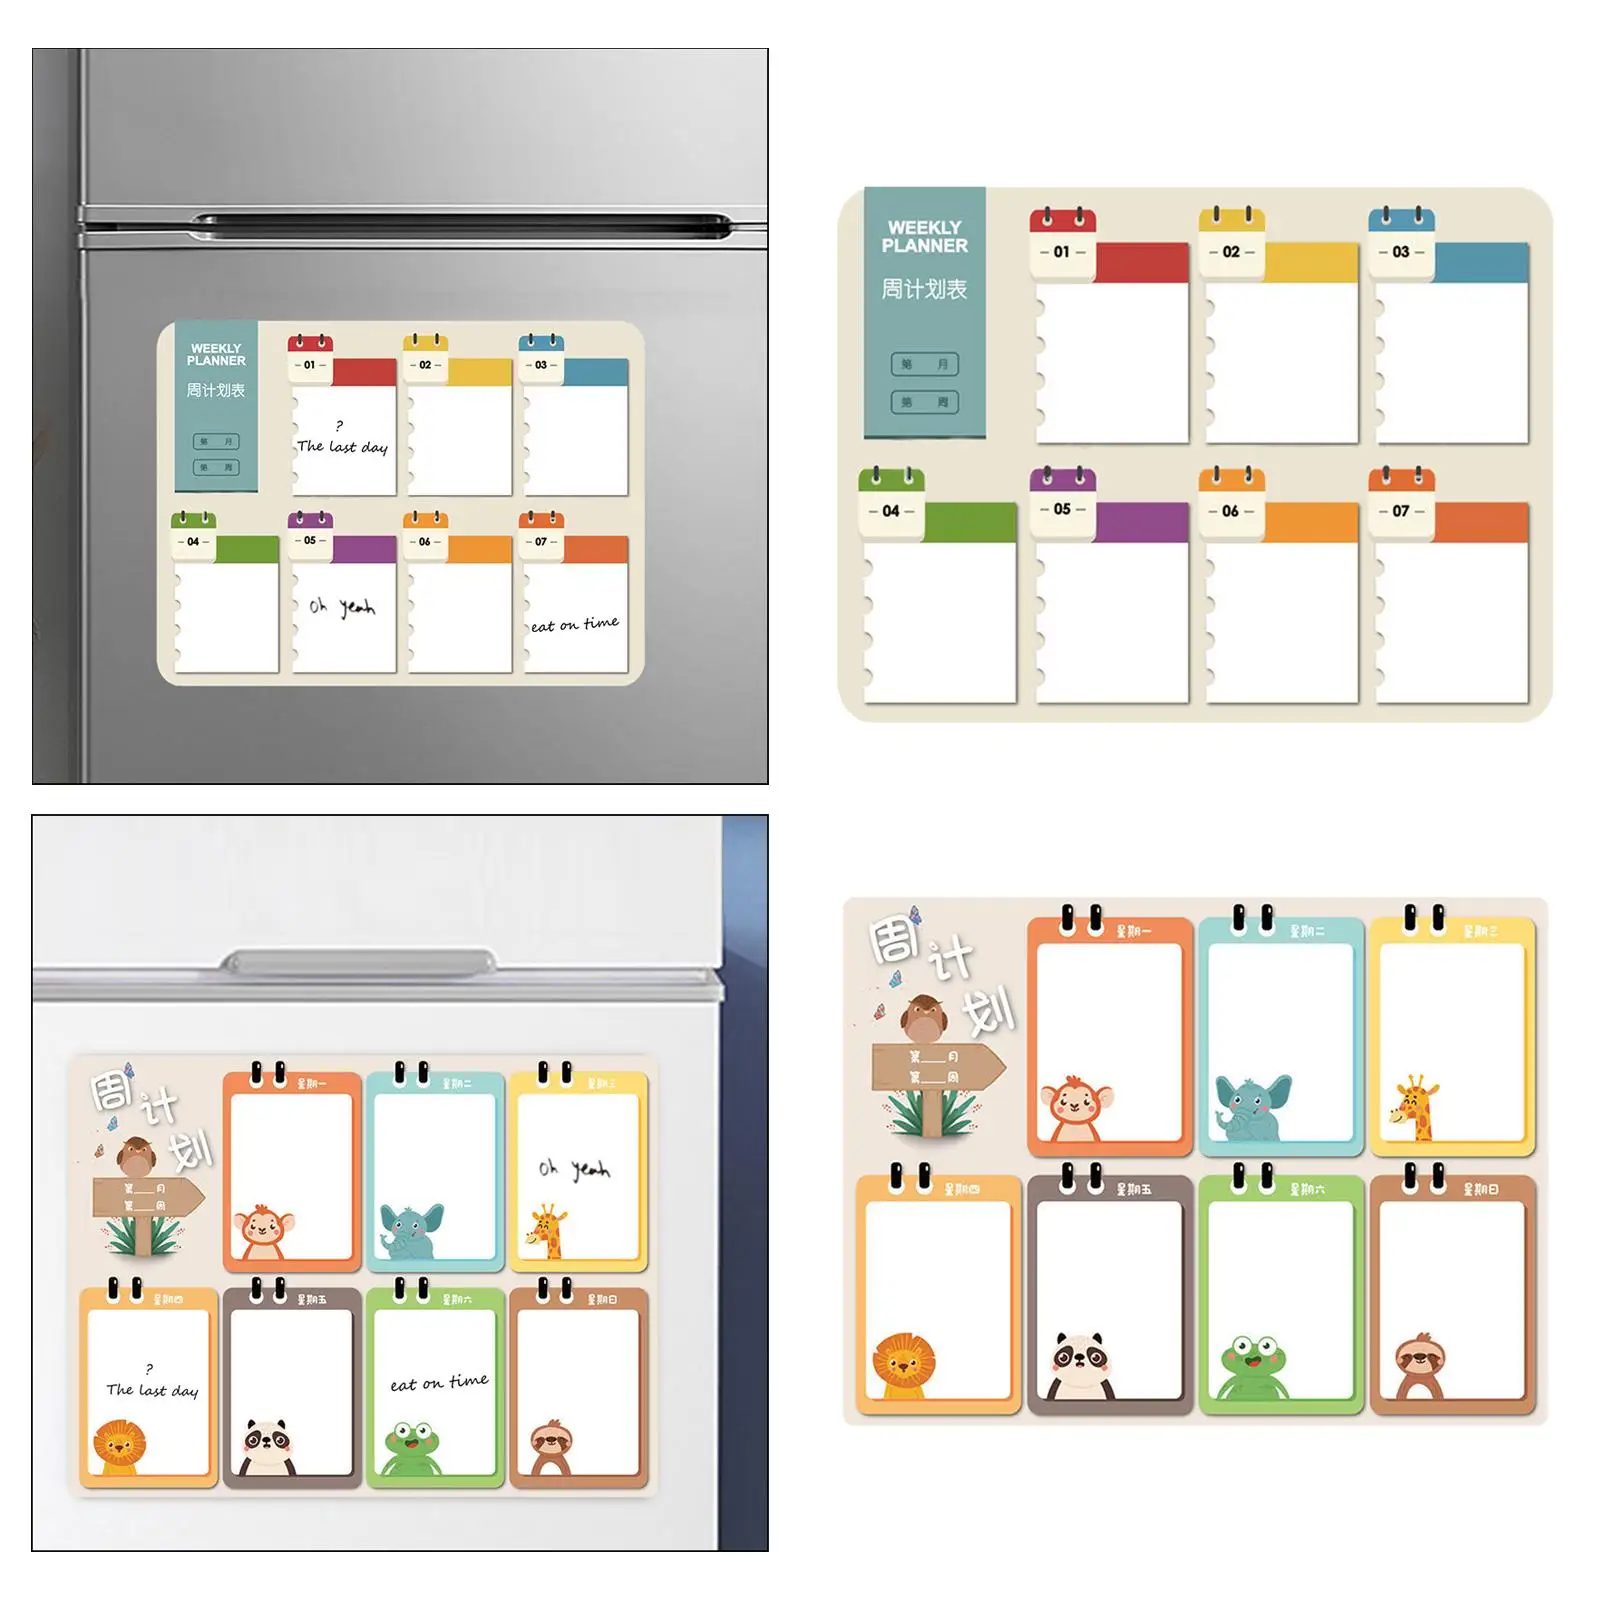 https://ae01.alicdn.com/kf/S4b0011113a264e2c96c47bfb1f783fe2c/Weekly-Planner-with-2-Whiteboard-Markers-Planning-with-Marker-Suction-Self-Adhesive-plan-Refrigerator-Sticker.jpg